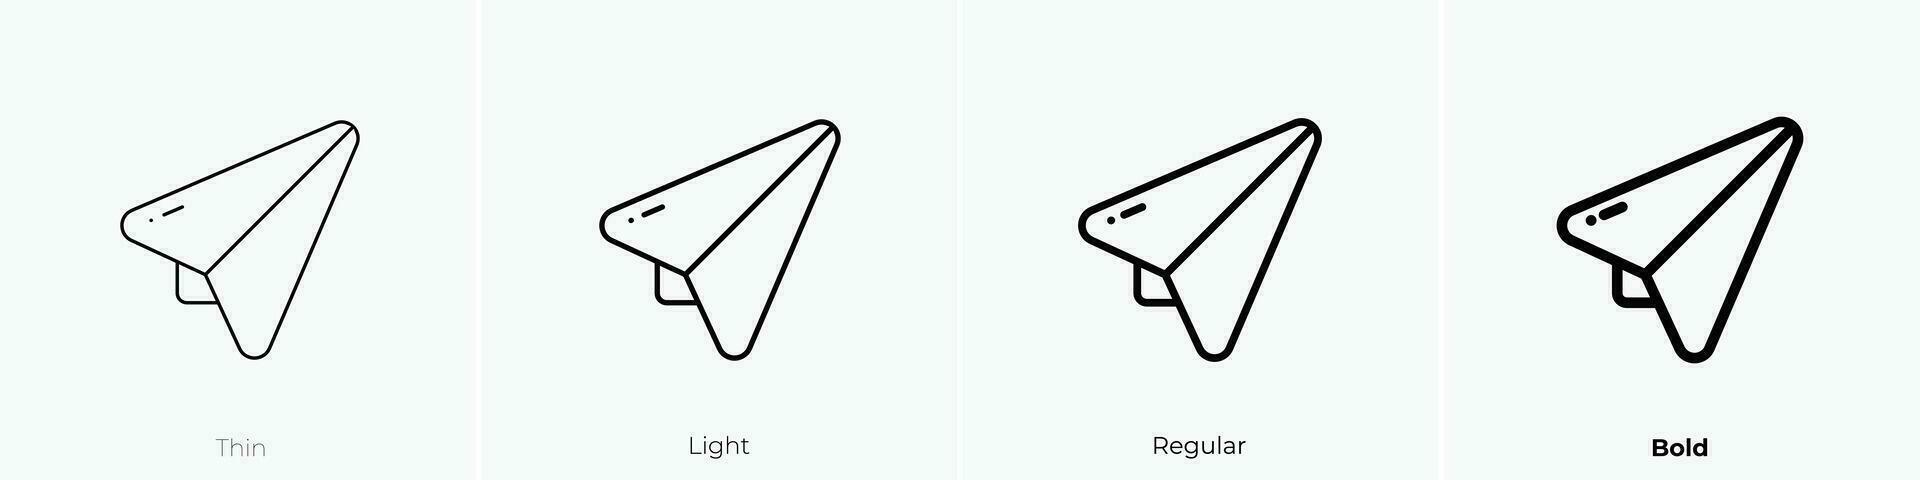 plane icon. Thin, Light, Regular And Bold style design isolated on white background vector